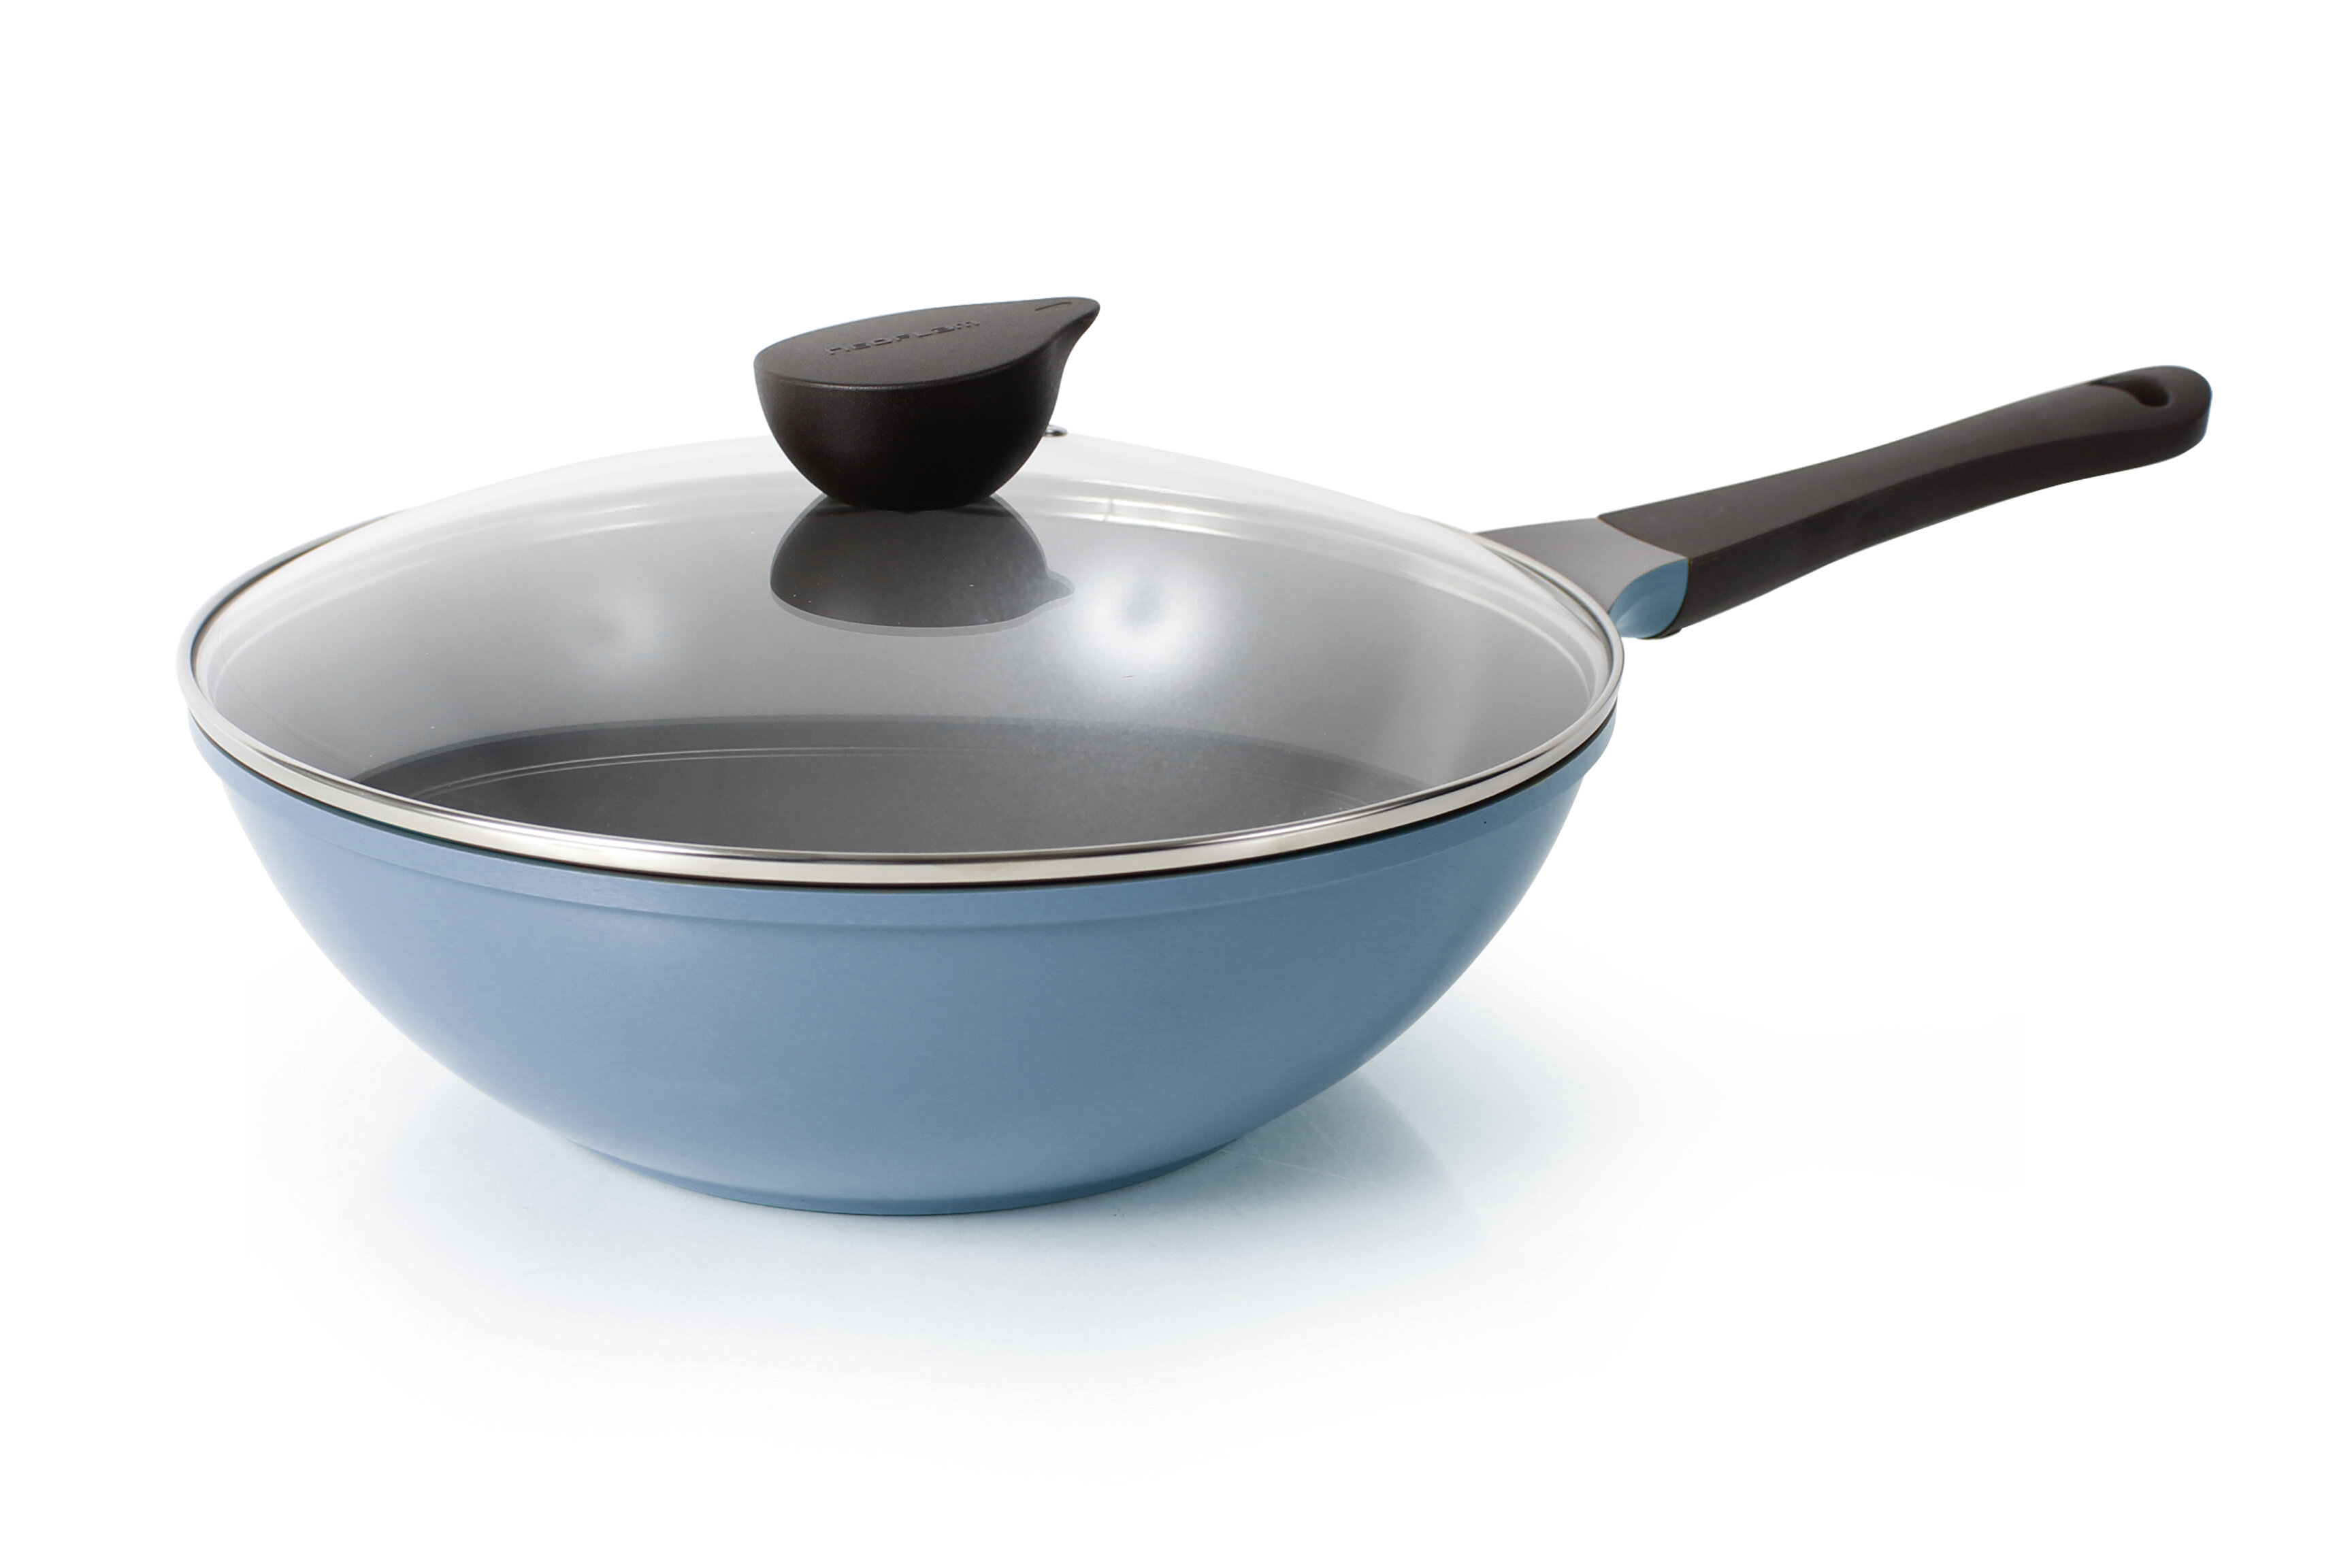 12 frying pan with lid